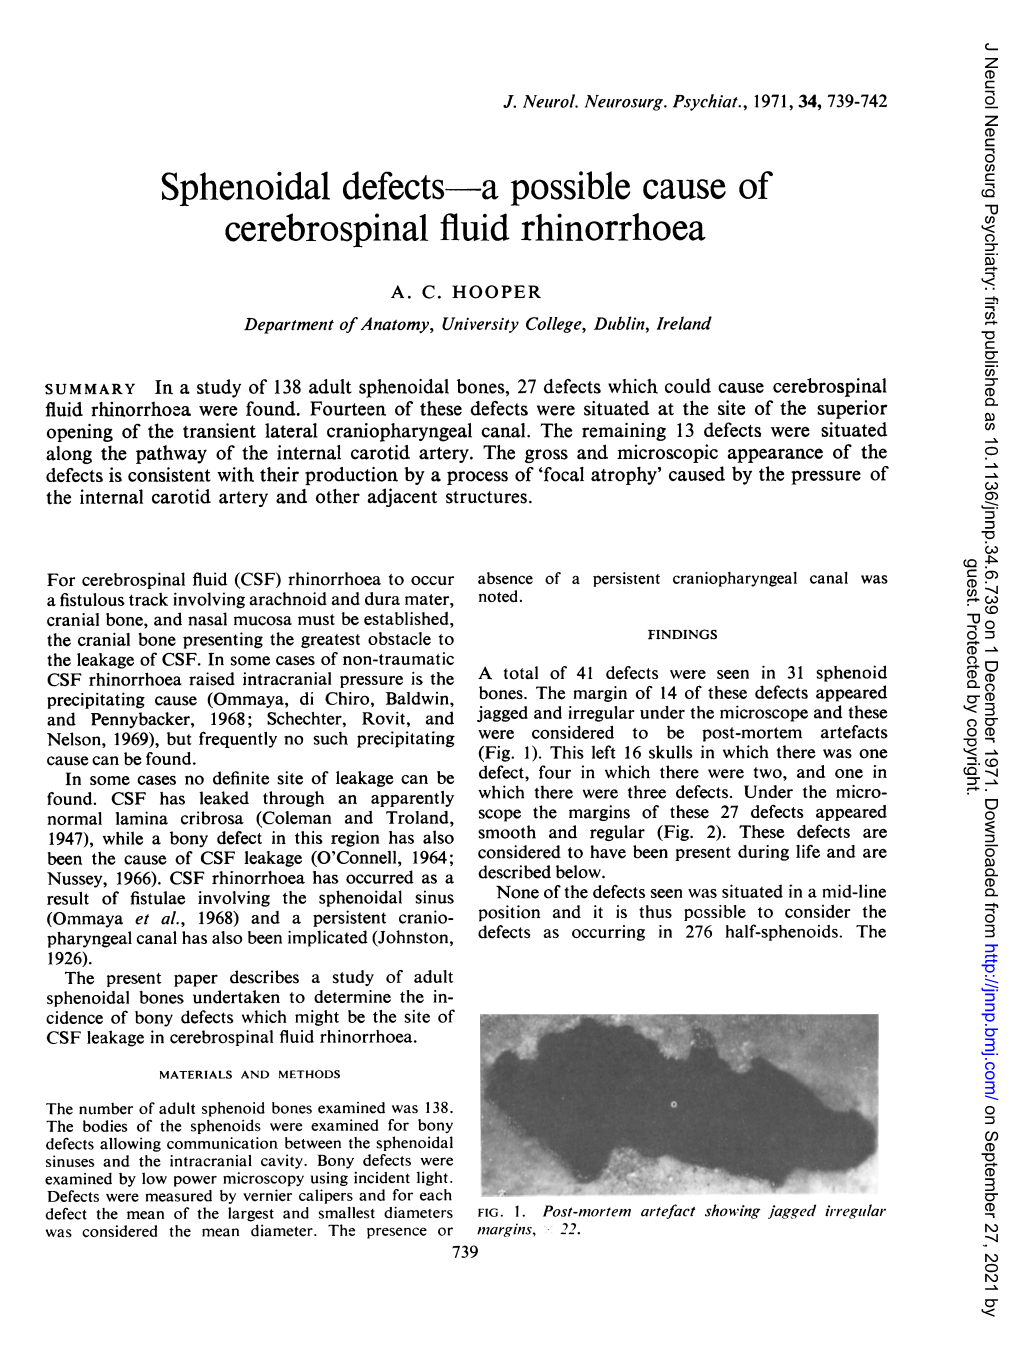 Sphenoidal Defects-A Possible Cause of Cerebrospinal Fluid Rhinorrhoea